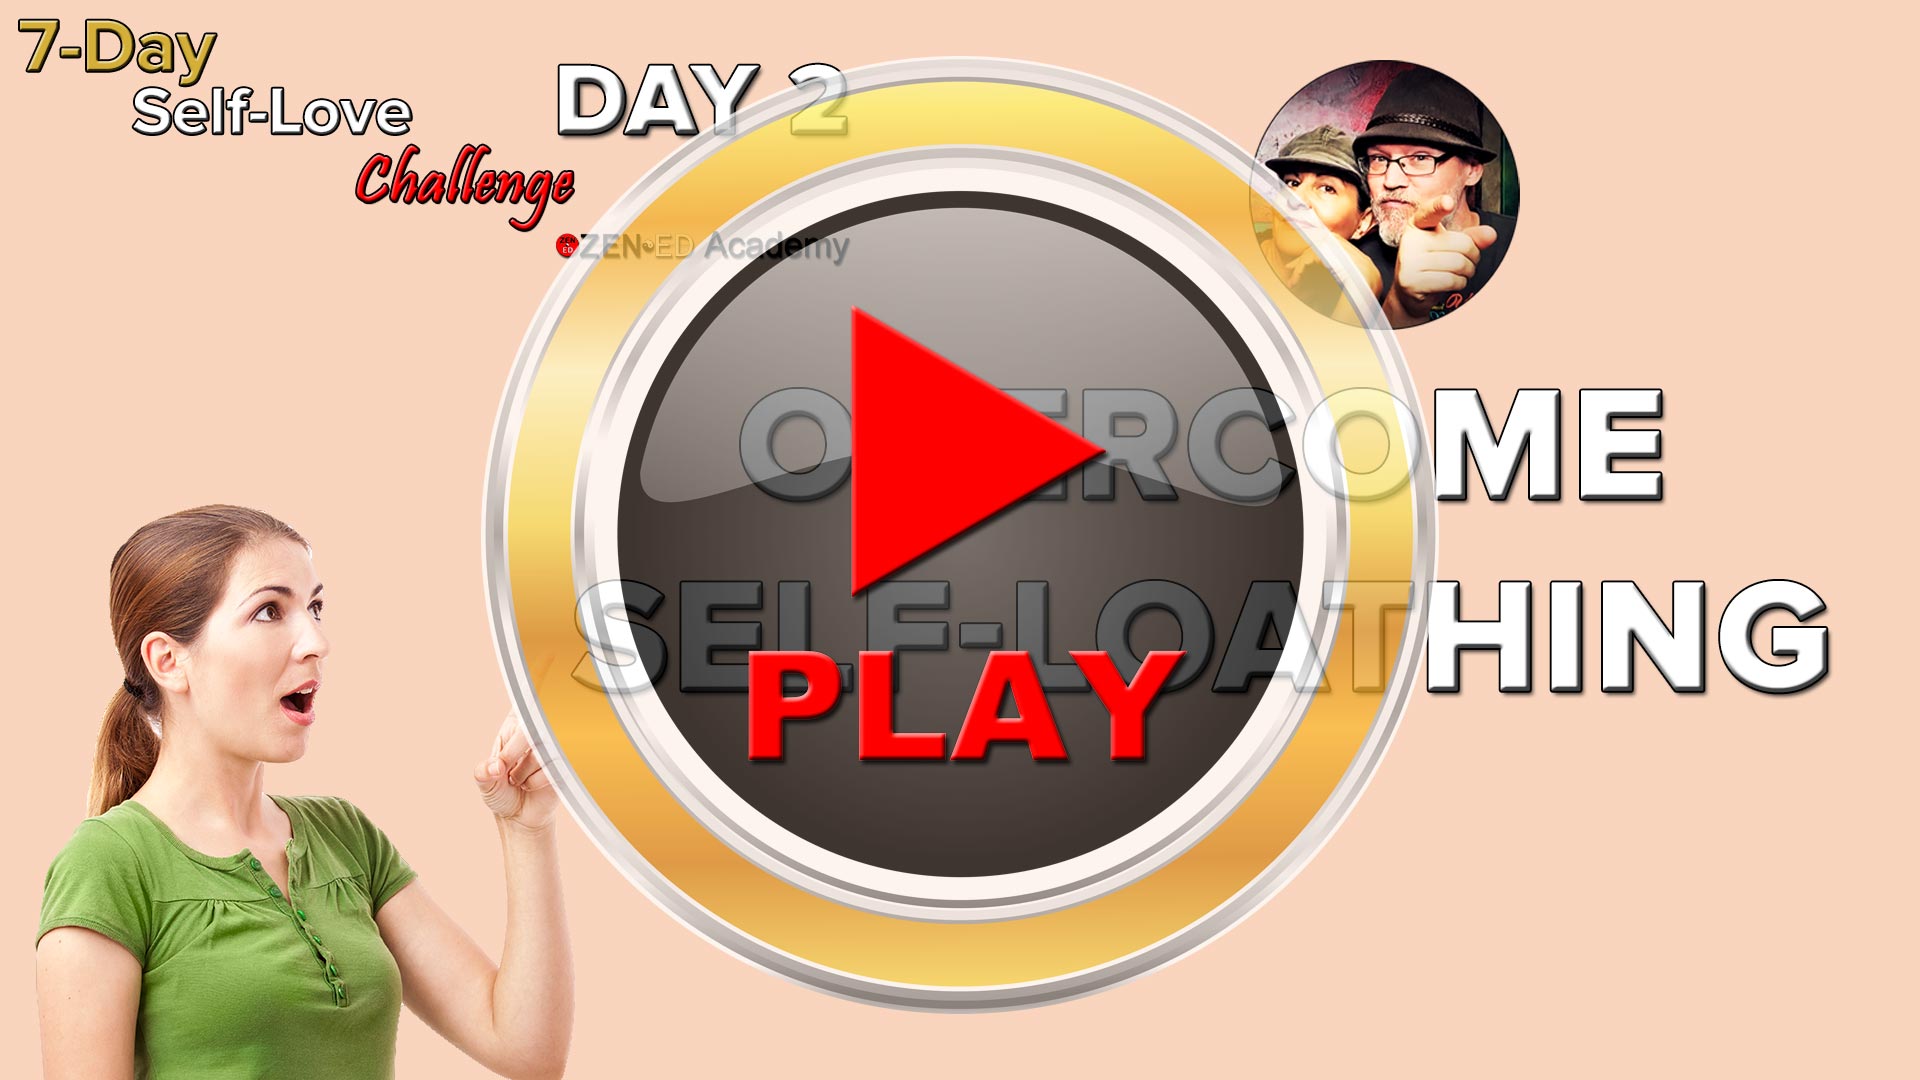 Play Video Day 2: Overcome Self-Loathing (Thumbnail) Zen Ed Academy's Free 7-Day Self-Love Challenge